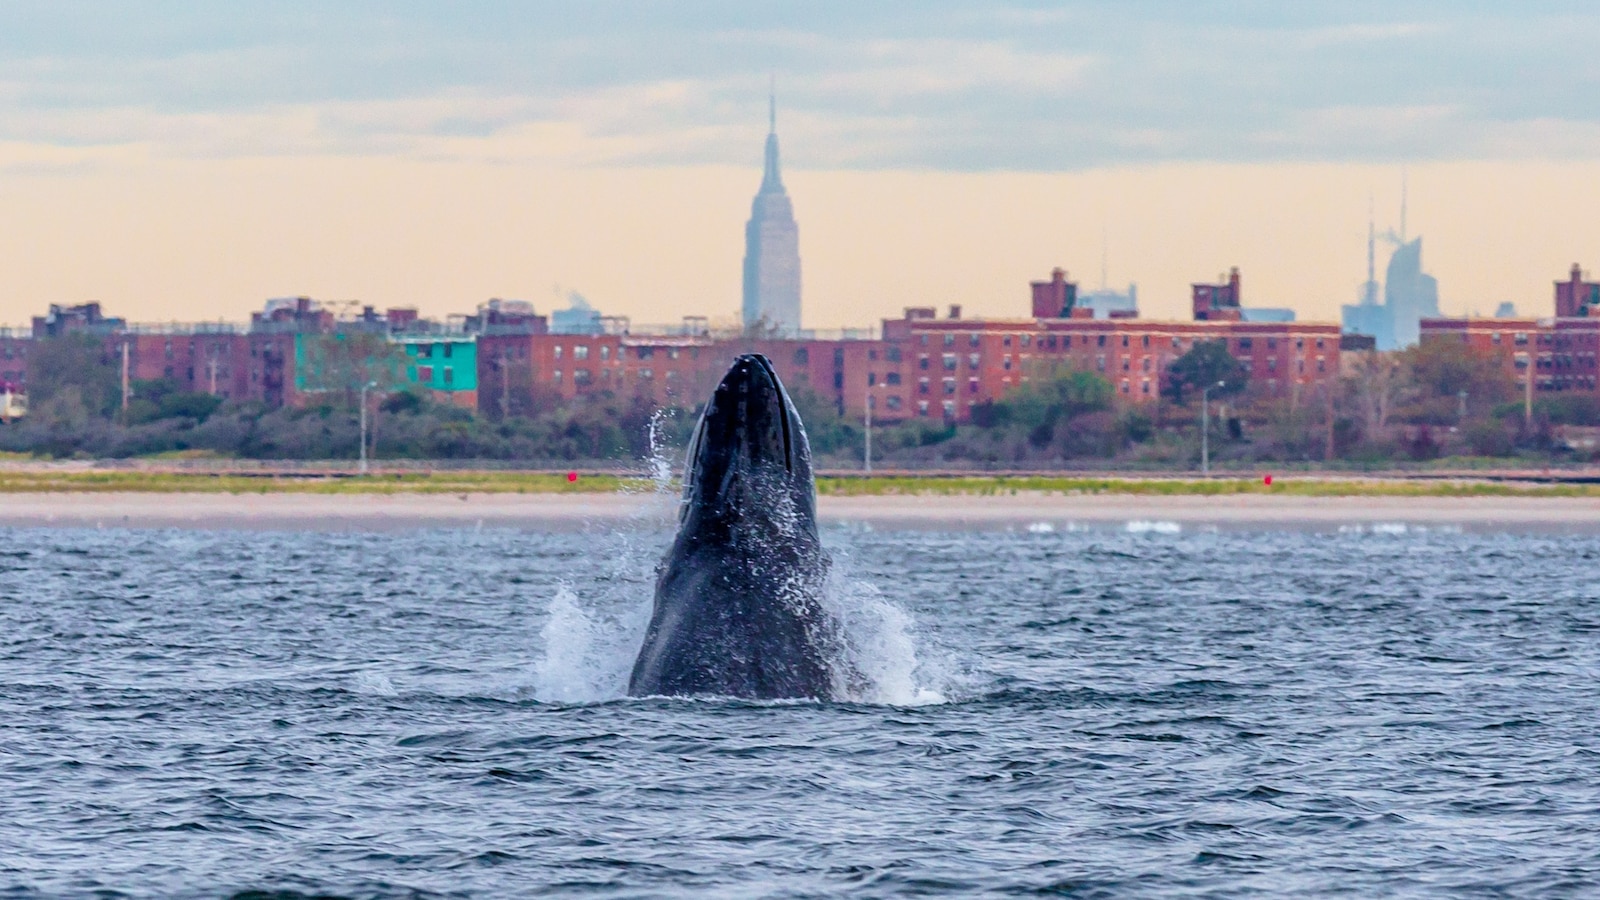 Gotham Whale, a New York City-based nonprofit, allows citizen scientists to assist in conservation efforts [Video]